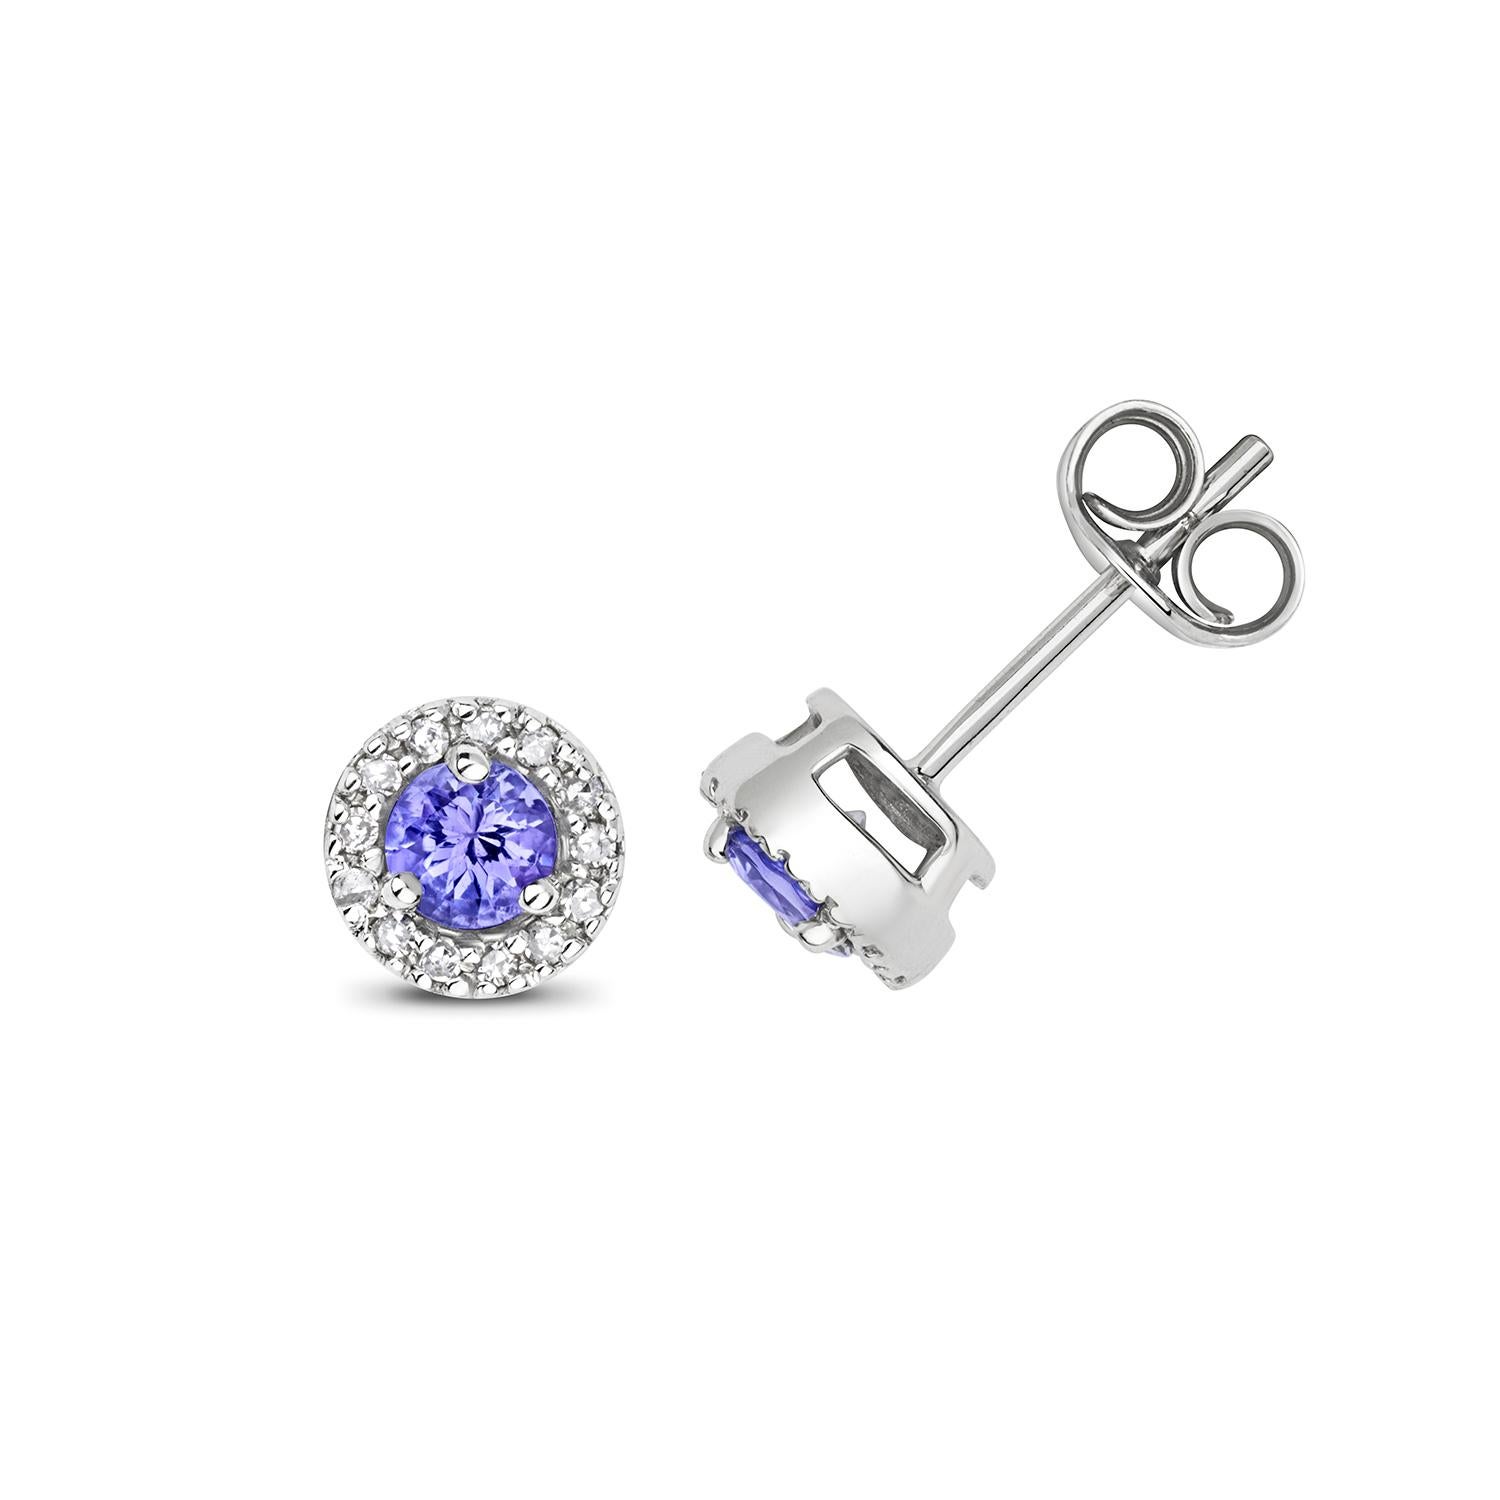 DIAMOND AND TANZANITE EARRINGS

9CT W/G SC/0.10 TAN/0.32CT

Weight: 1.2g

Number Of Stones:28

Total Carates:0.420